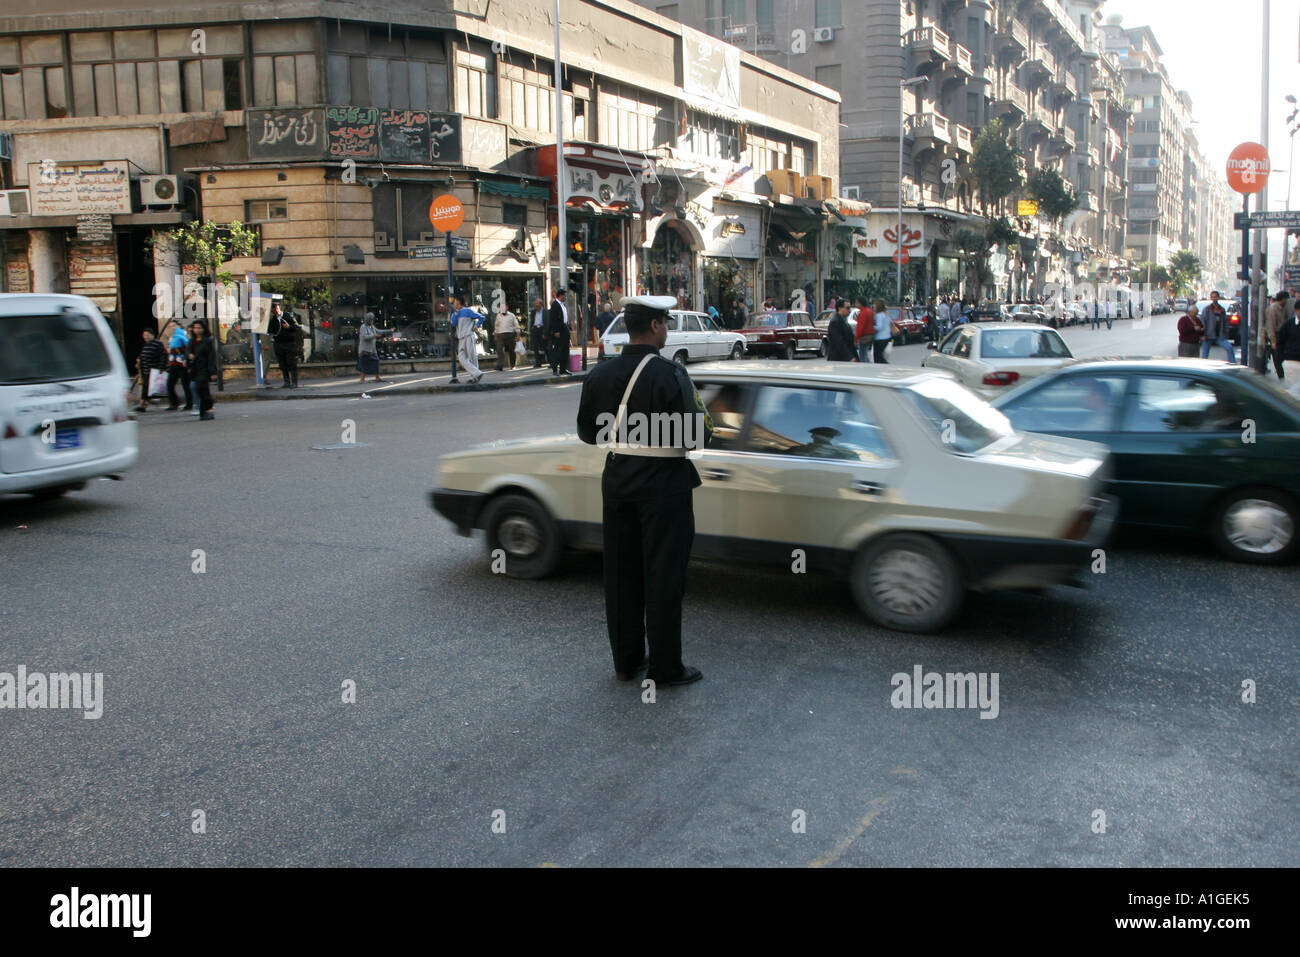 A Traffic warden directs traffic in Cairo’s city centre. Stock Photo